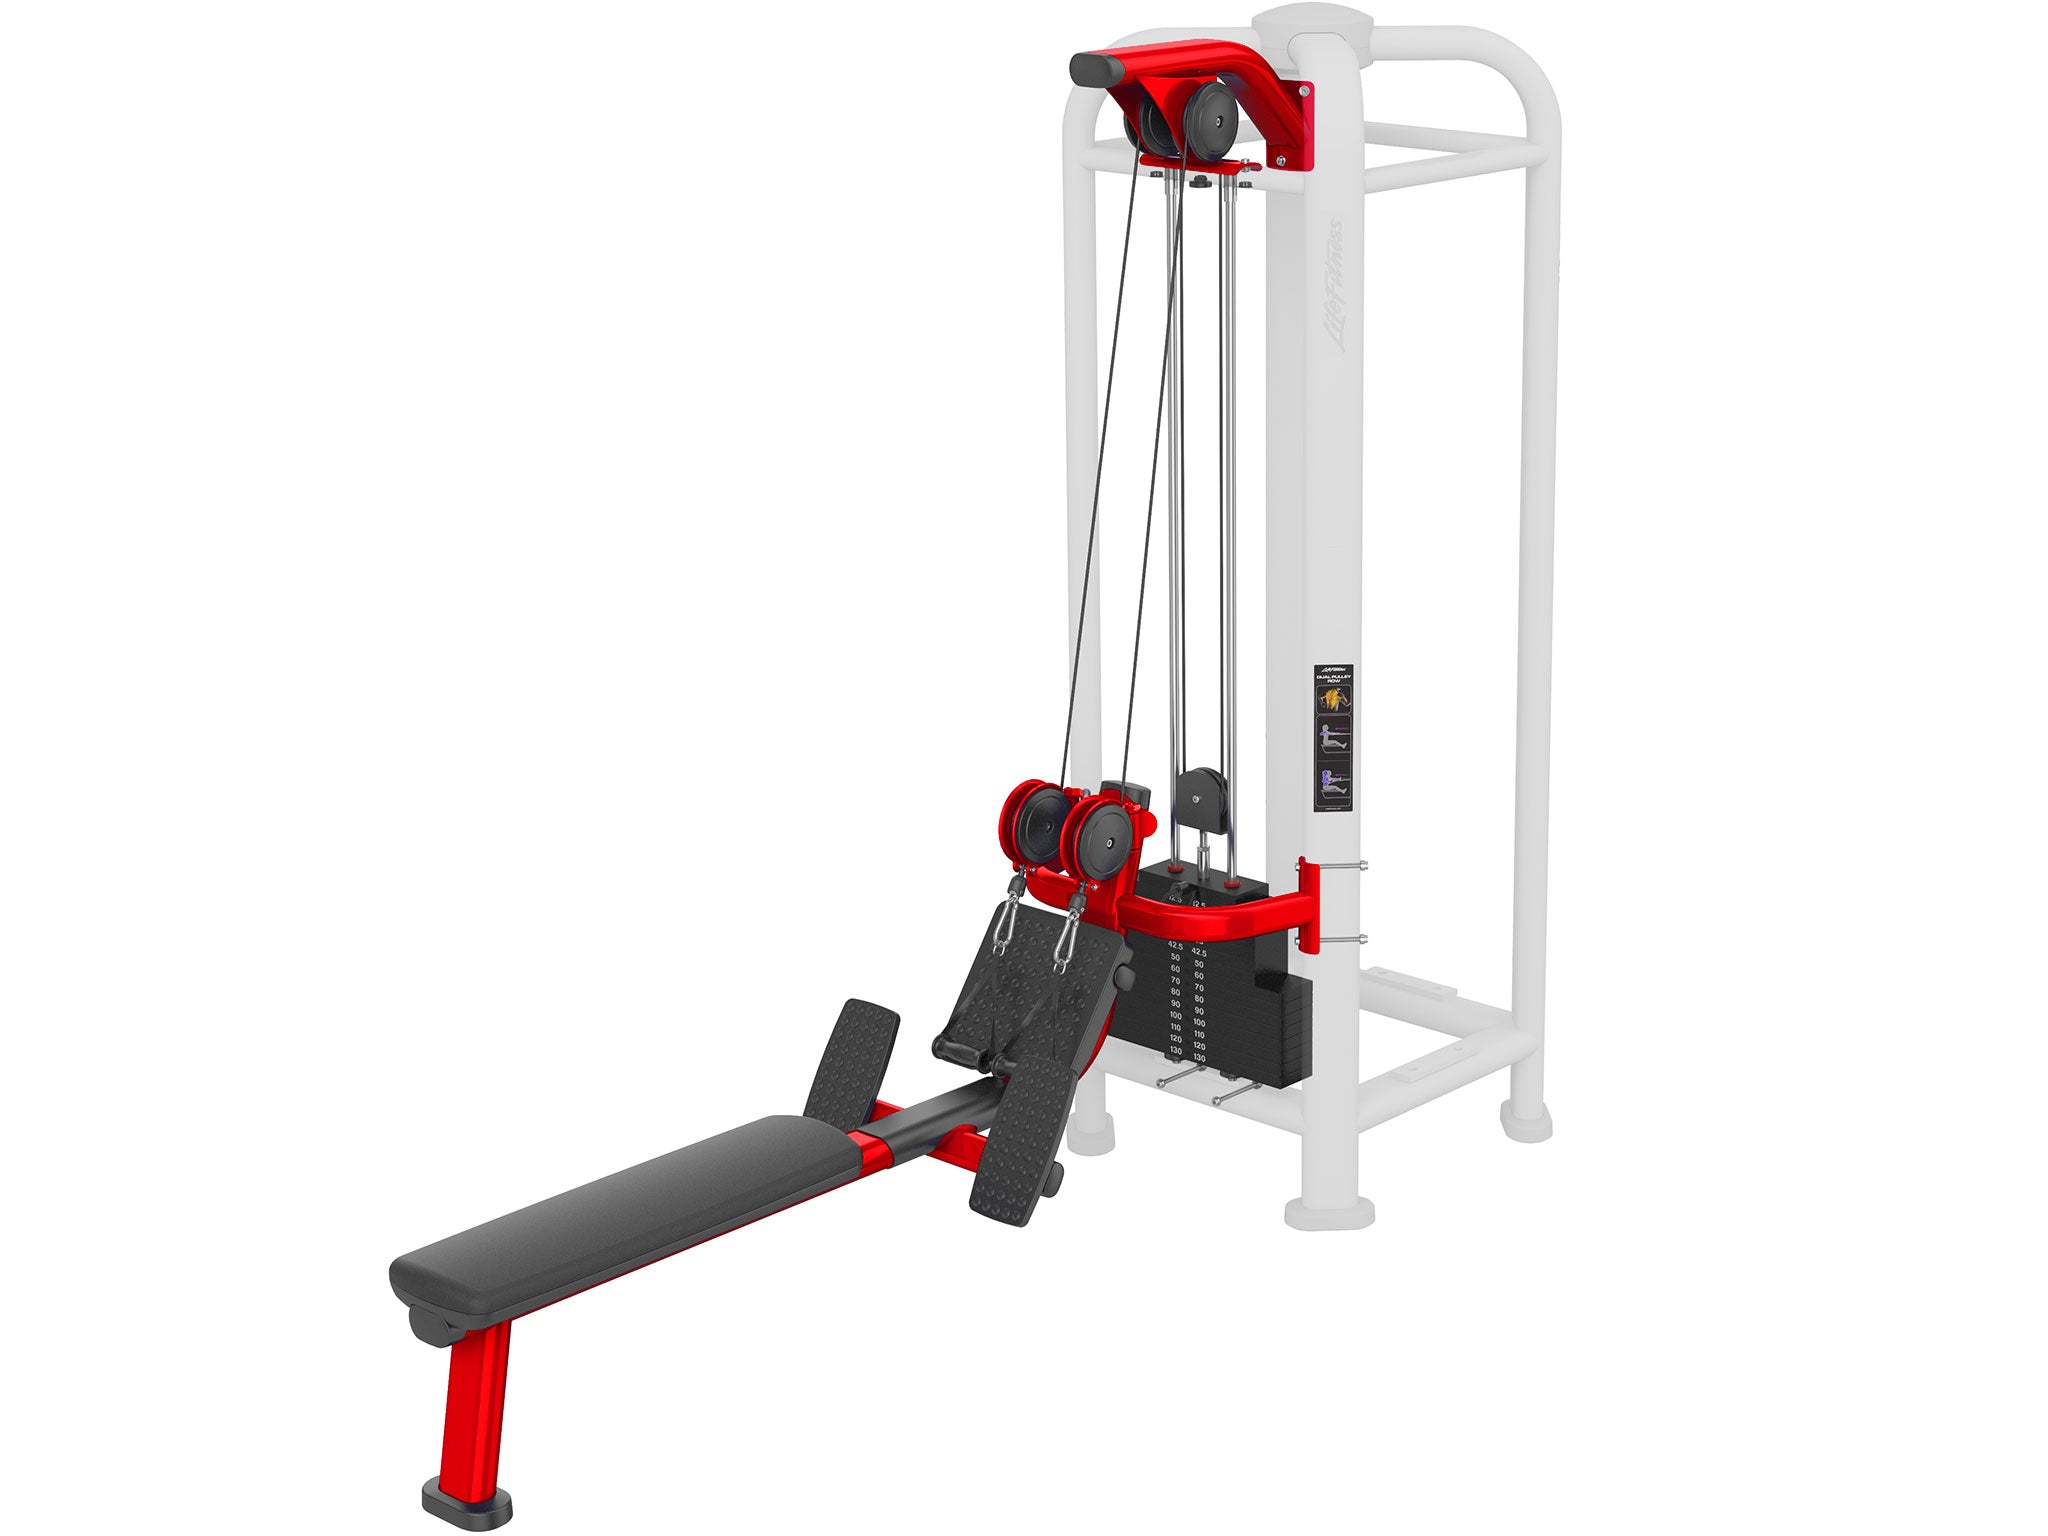 Factory image of a Life Fitness Signature Multi Jungle Dual Pulley Row Station